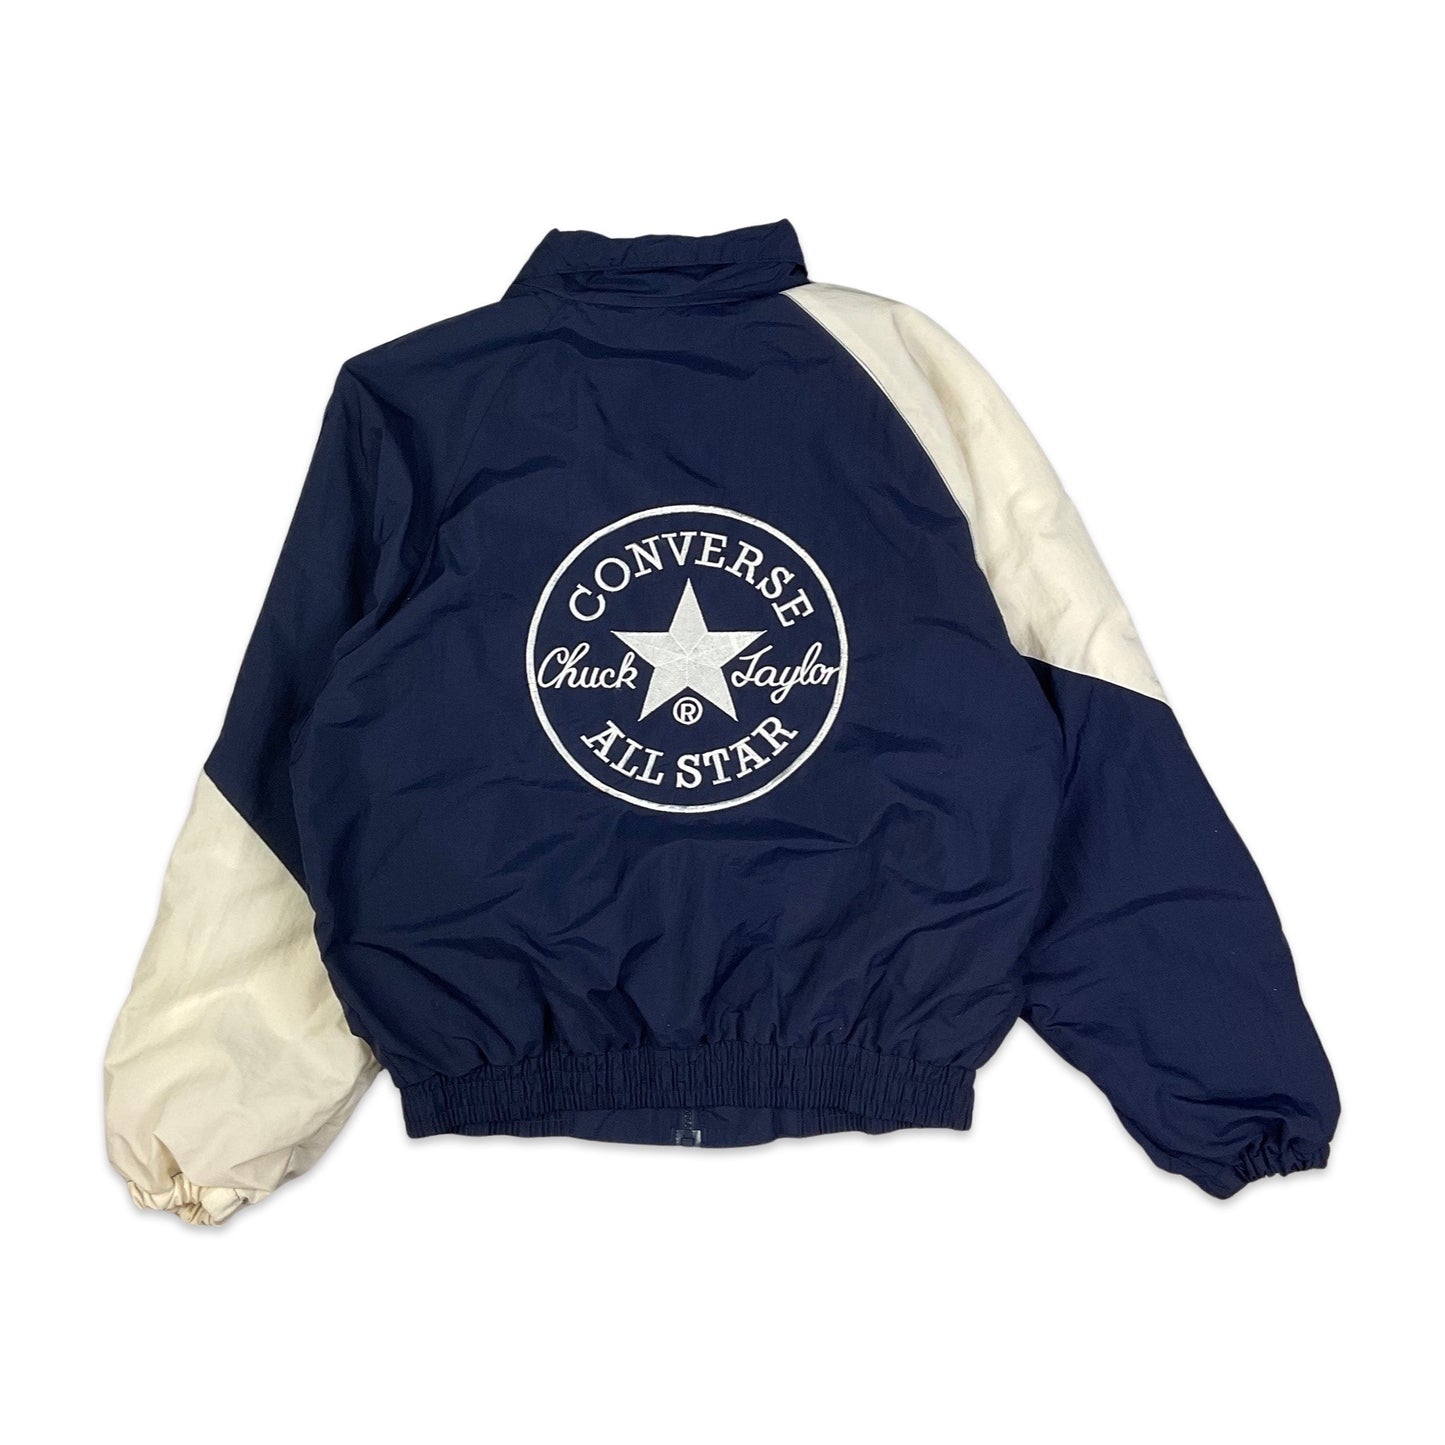 Vintage 80s 90s Converse Navy & White Shell Bomber Jacket M L